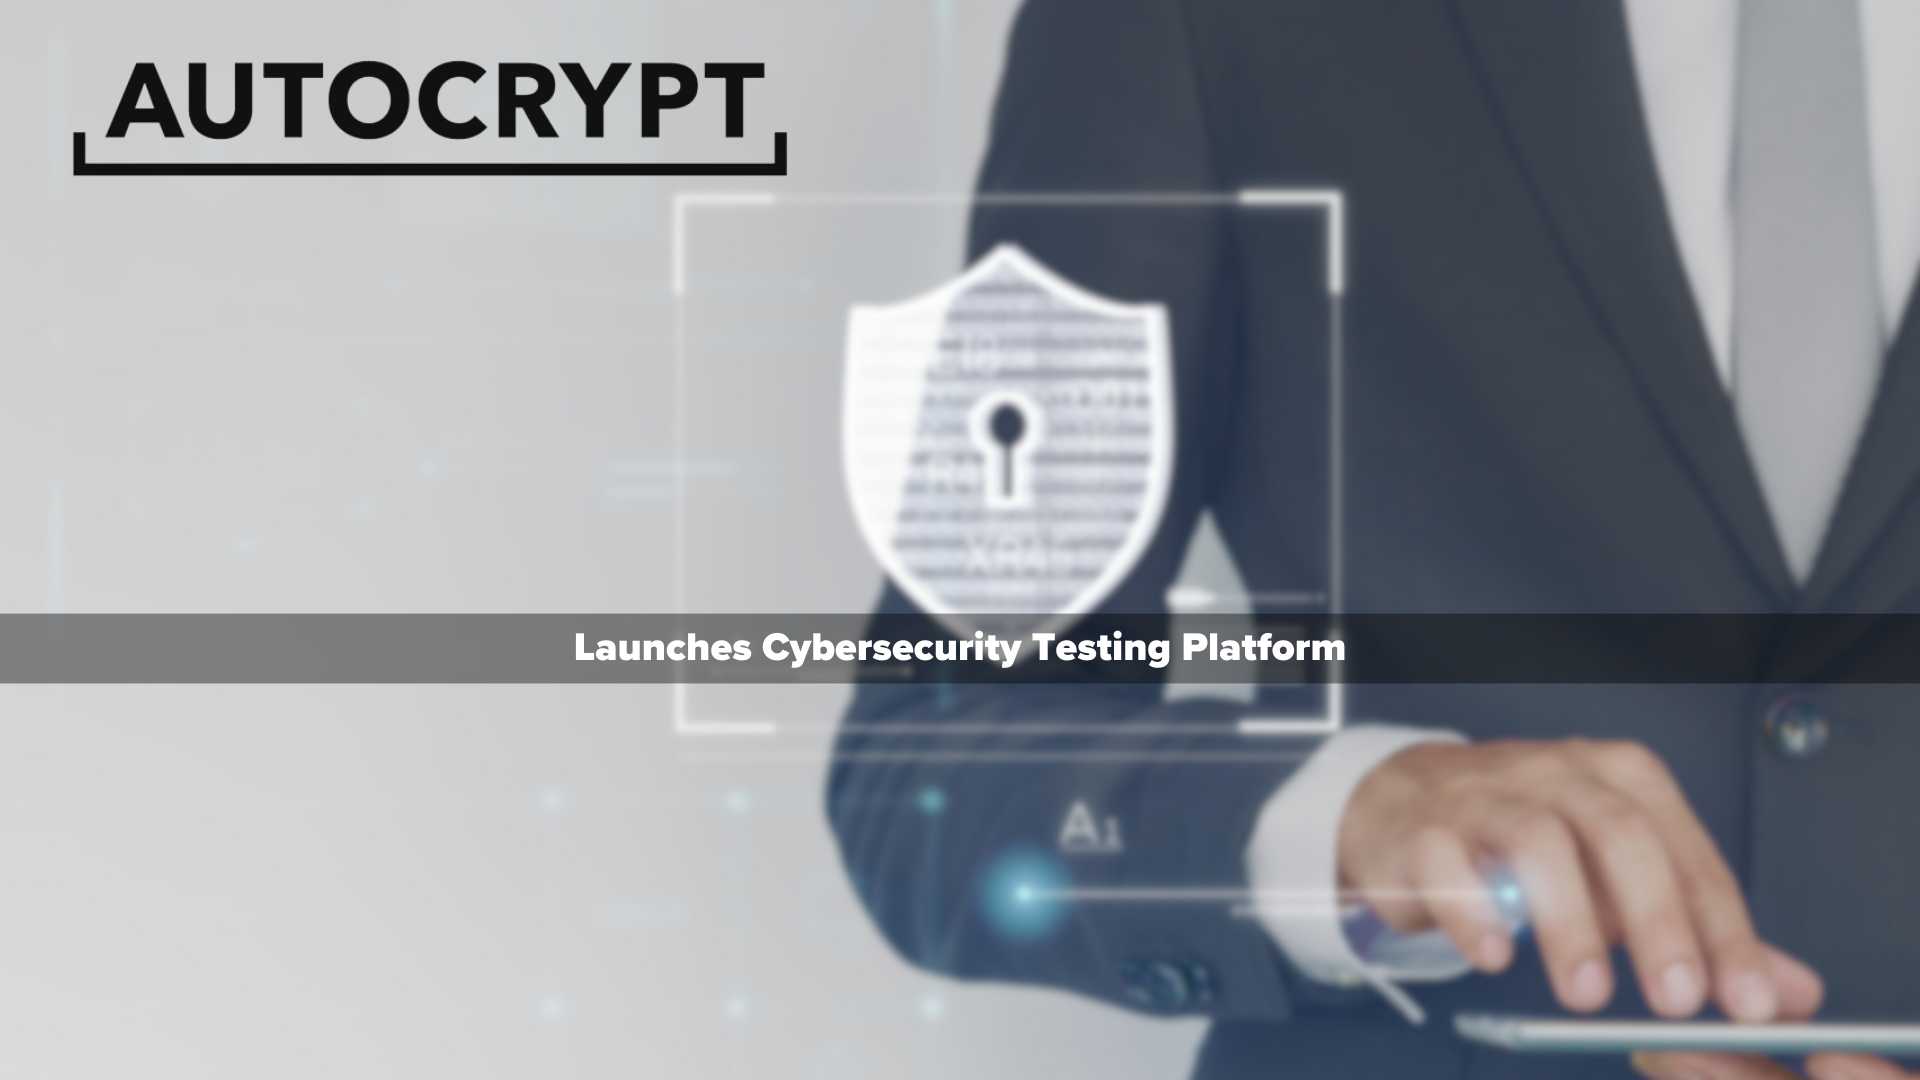 AUTOCRYPT Launches Cybersecurity Testing Platform for UN R155/156 and GB Compliance